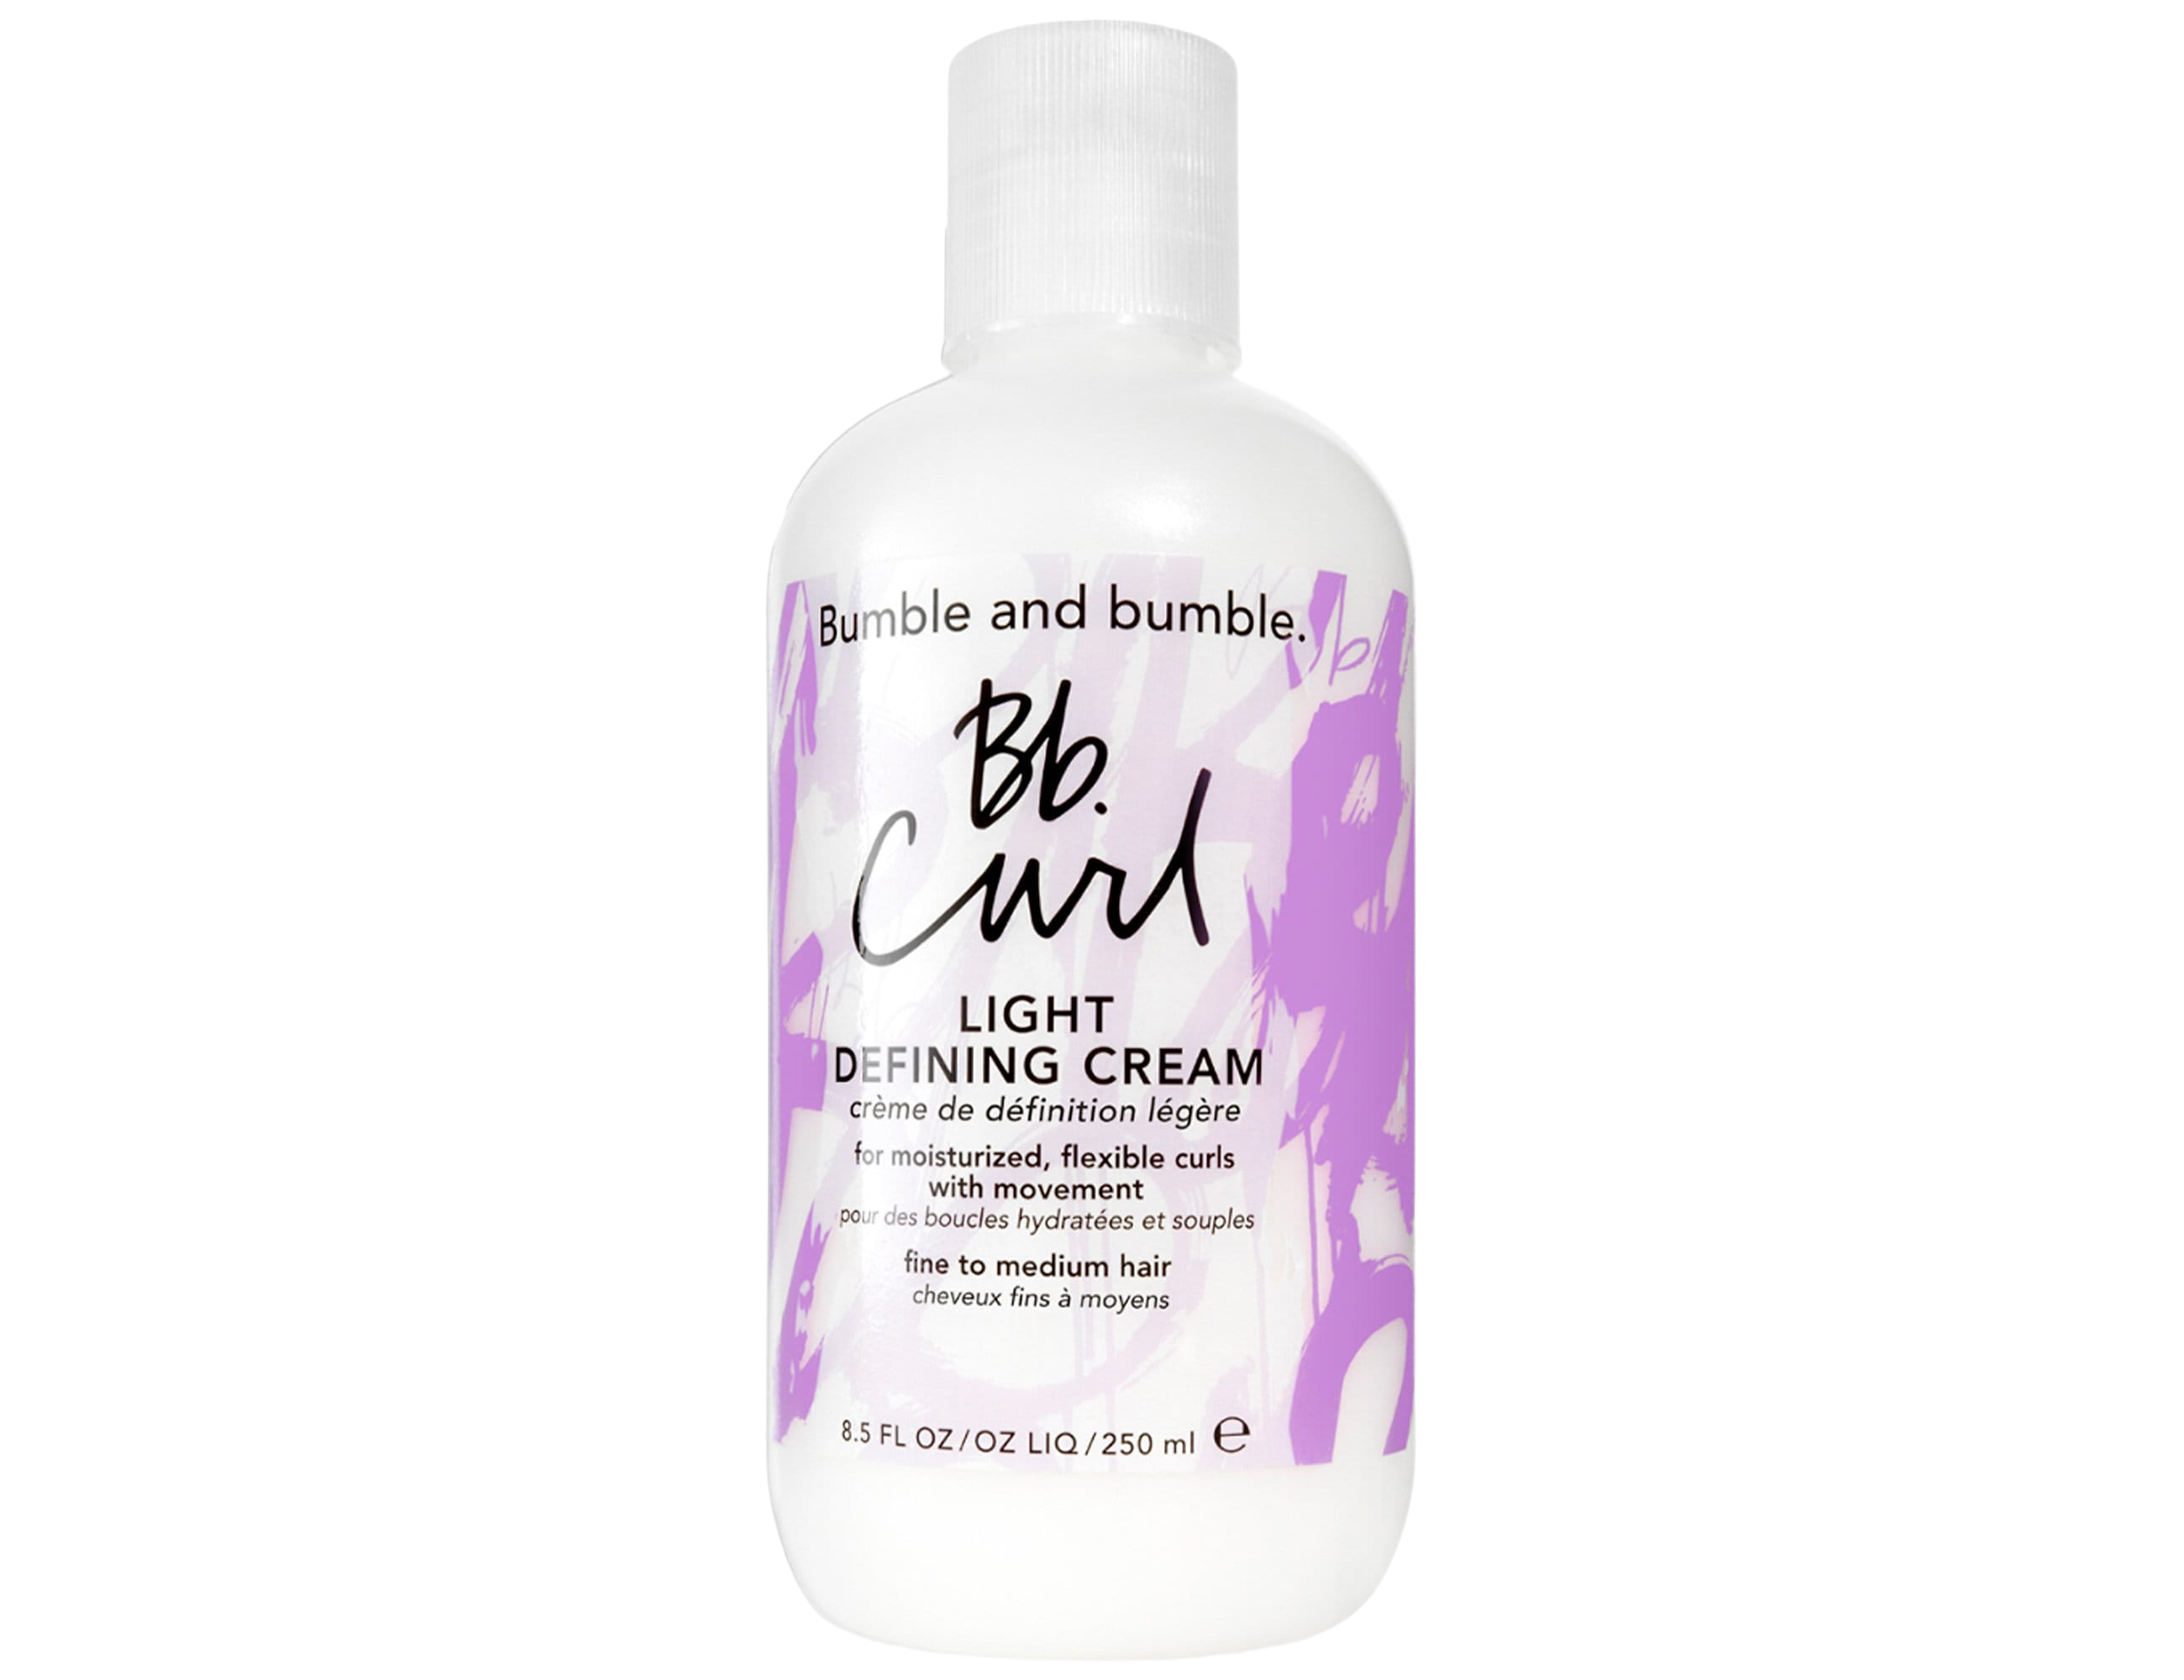 bumble and bumble curl light defining cream dupe